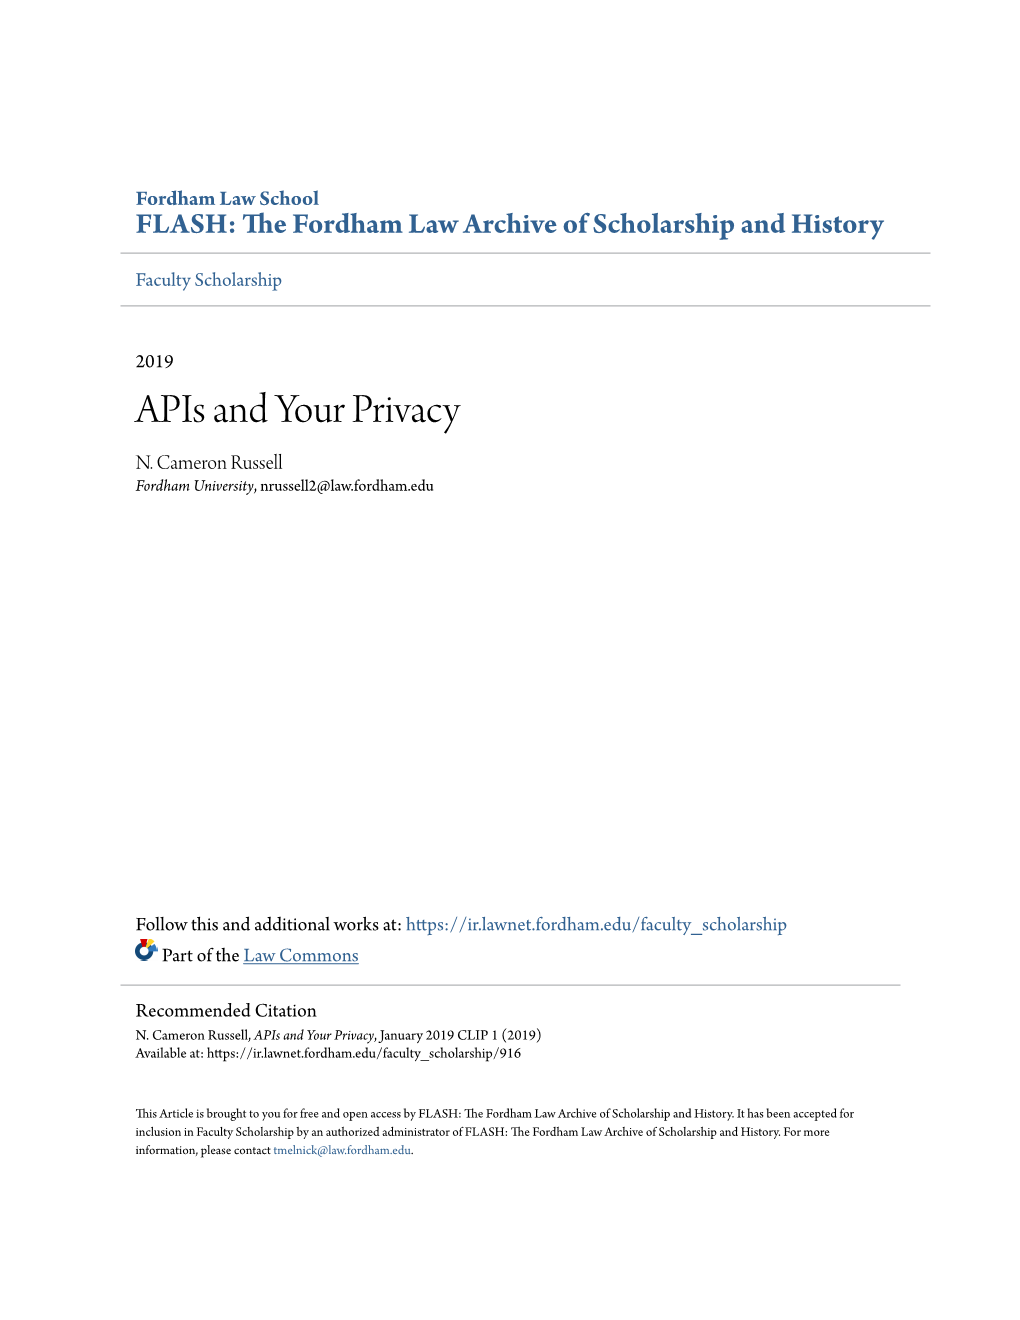 Apis and Your Privacy N